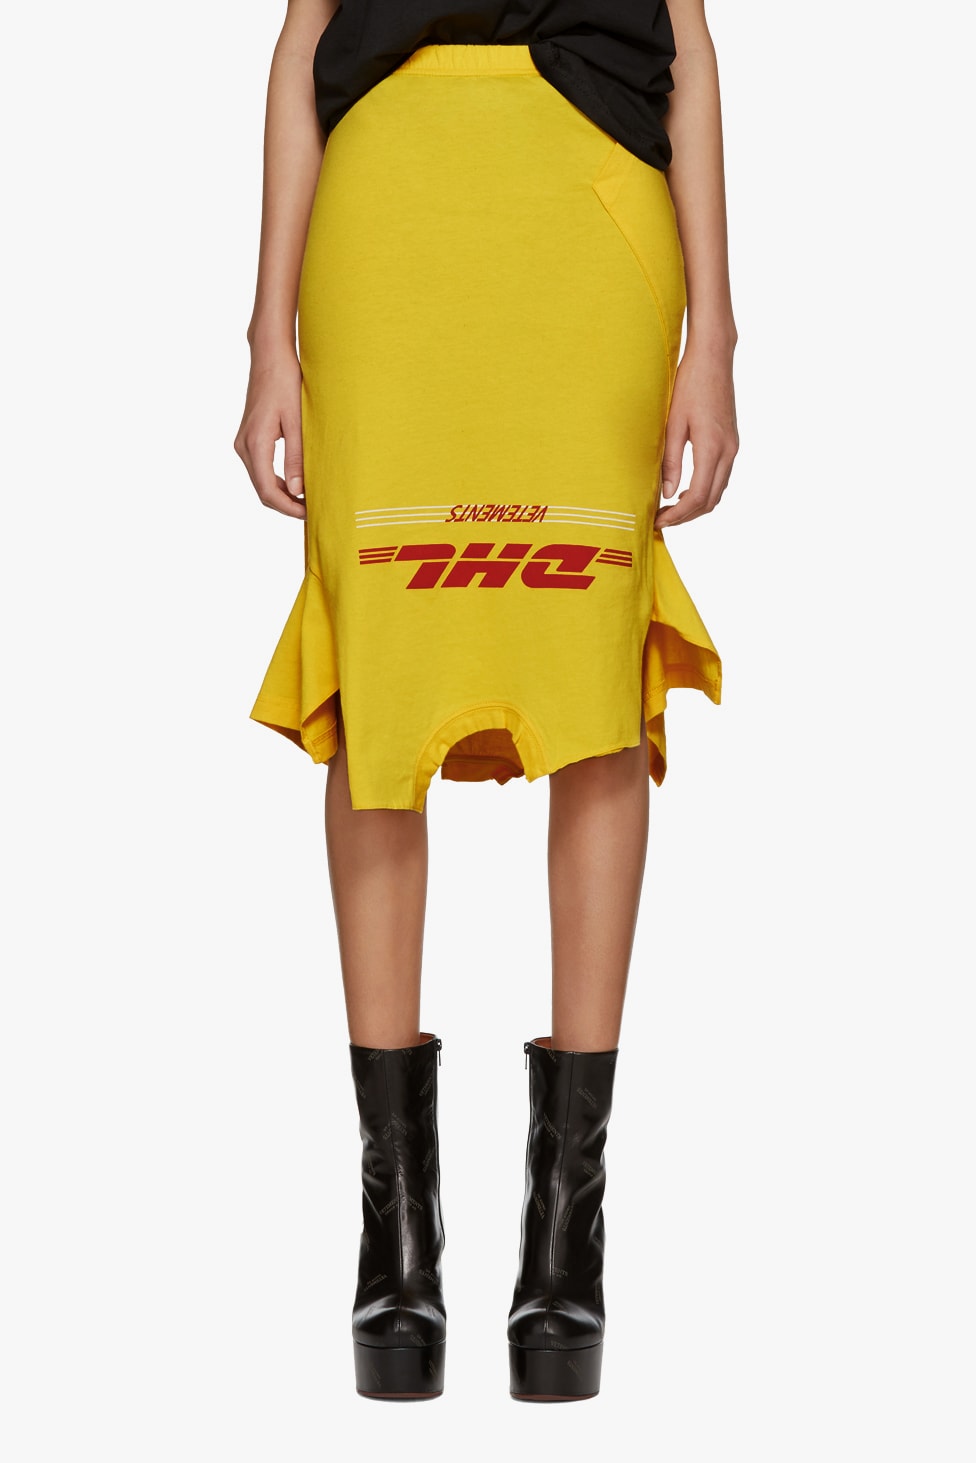 Vetements Spring/Summer Collection Drop DHL skirt